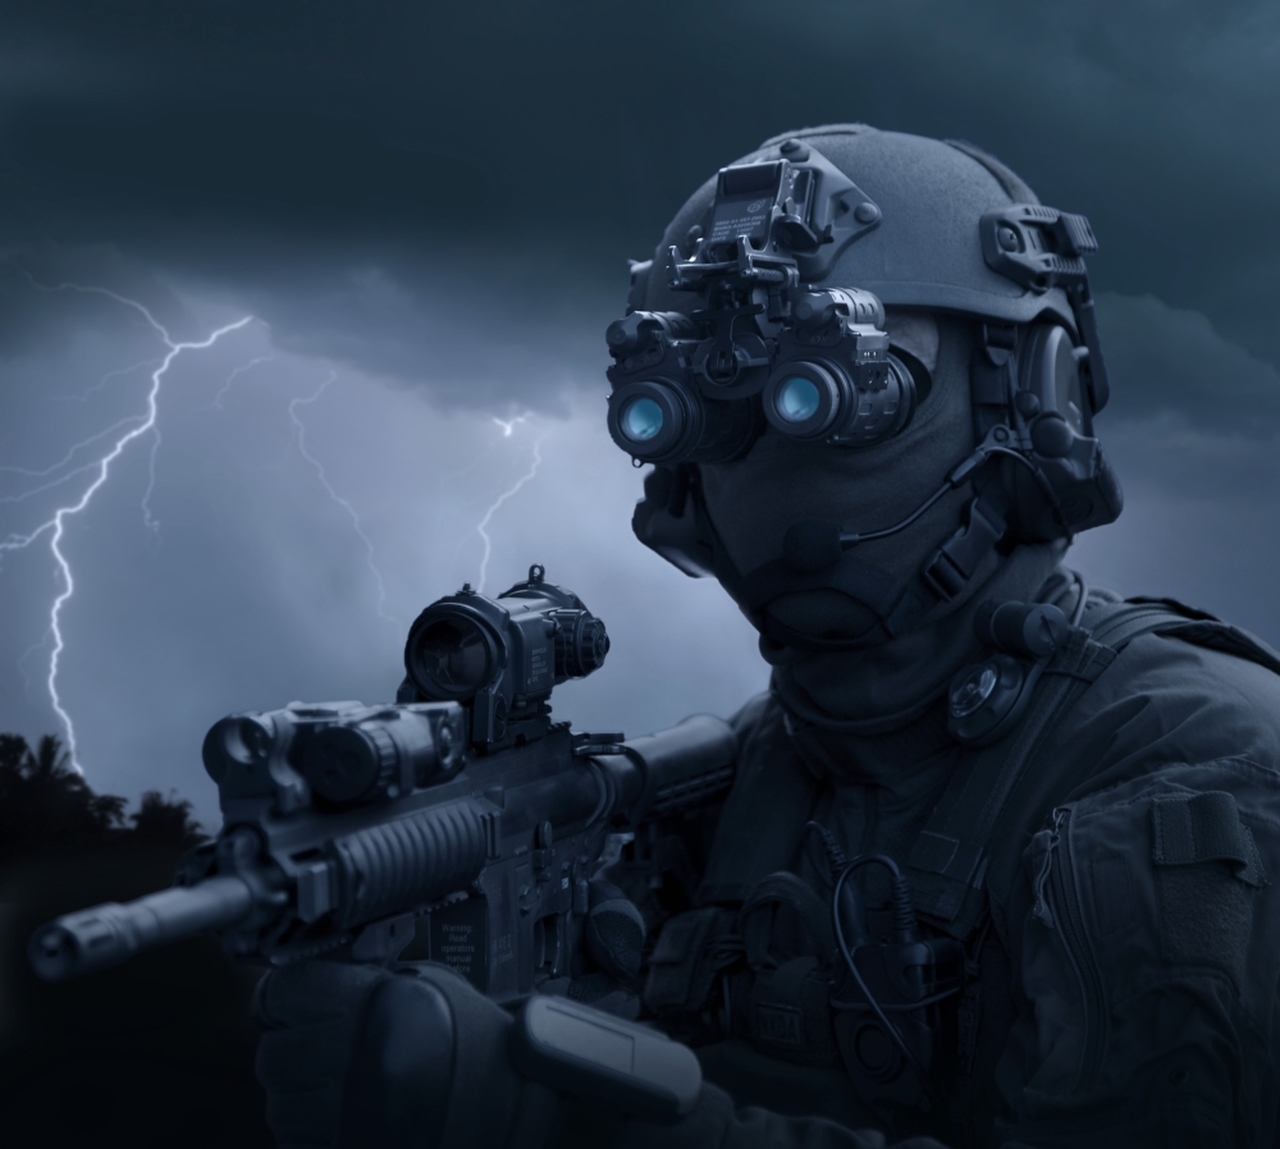 Special operations forces soldier equipped with night vision and an HK416 assault rifle Poster Print # VARPSTTWE300037M